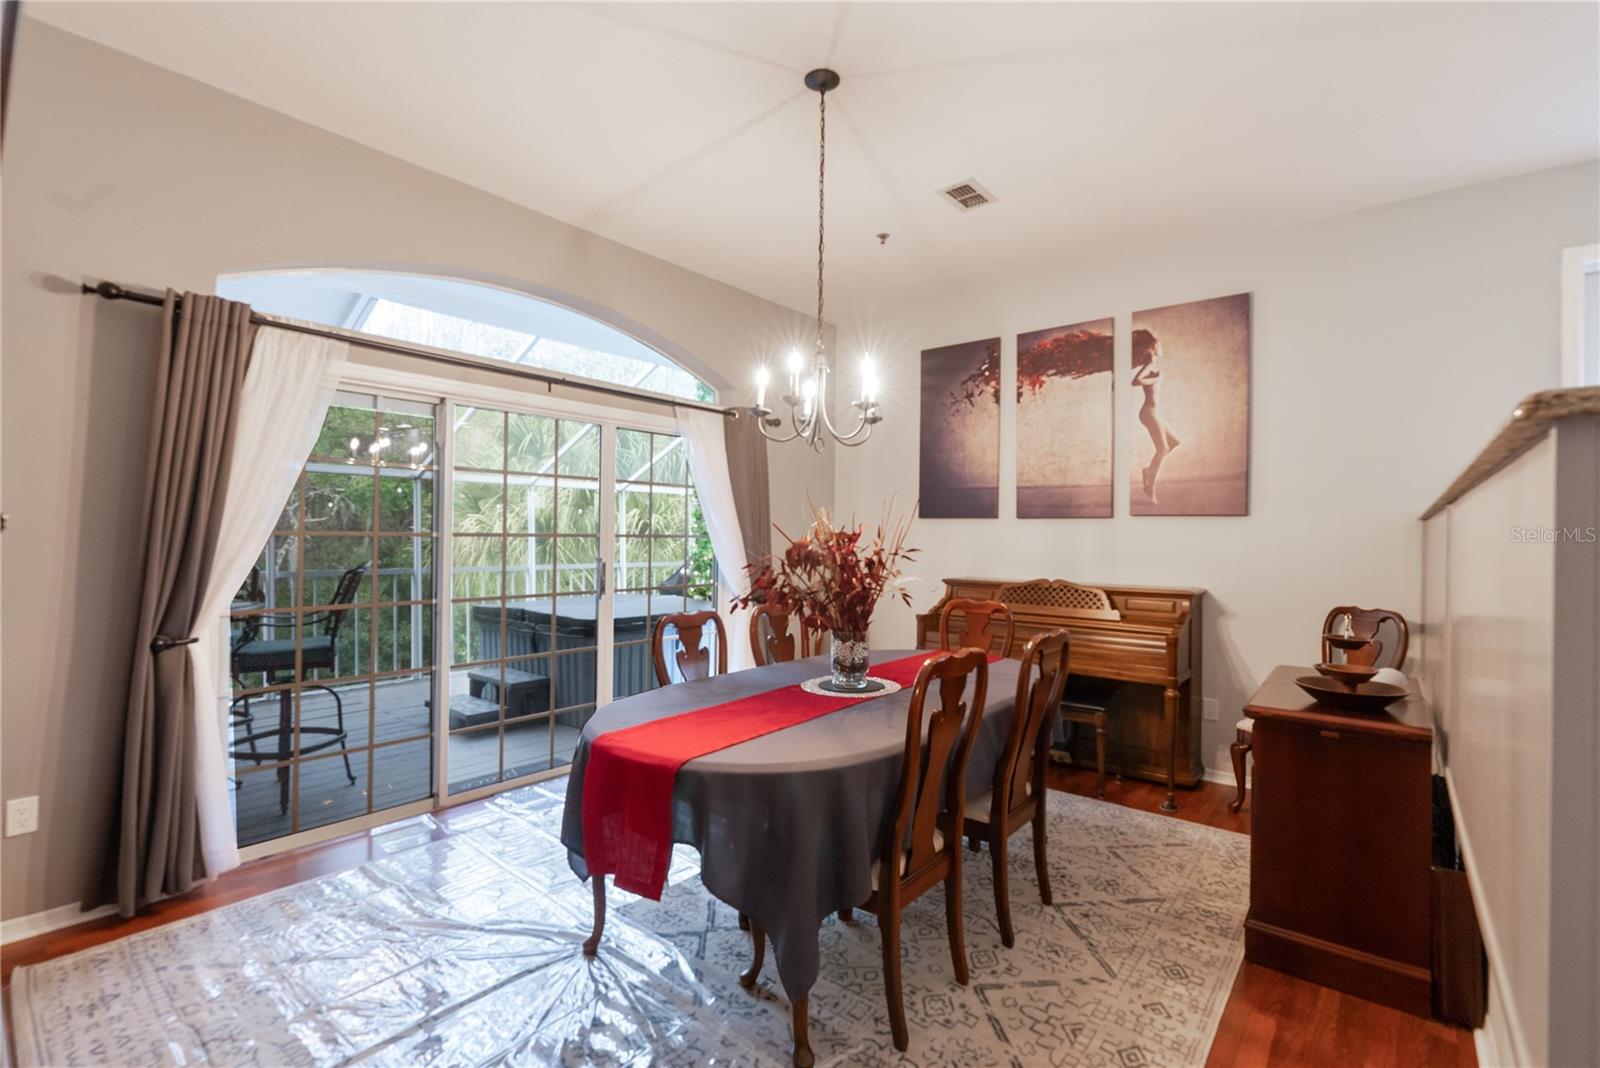 The formal dining room overlooks the conservation area. Large buffet of cabinets and stone counter tops separate the dining room from the kitchen making this ideal for entertaining guests.